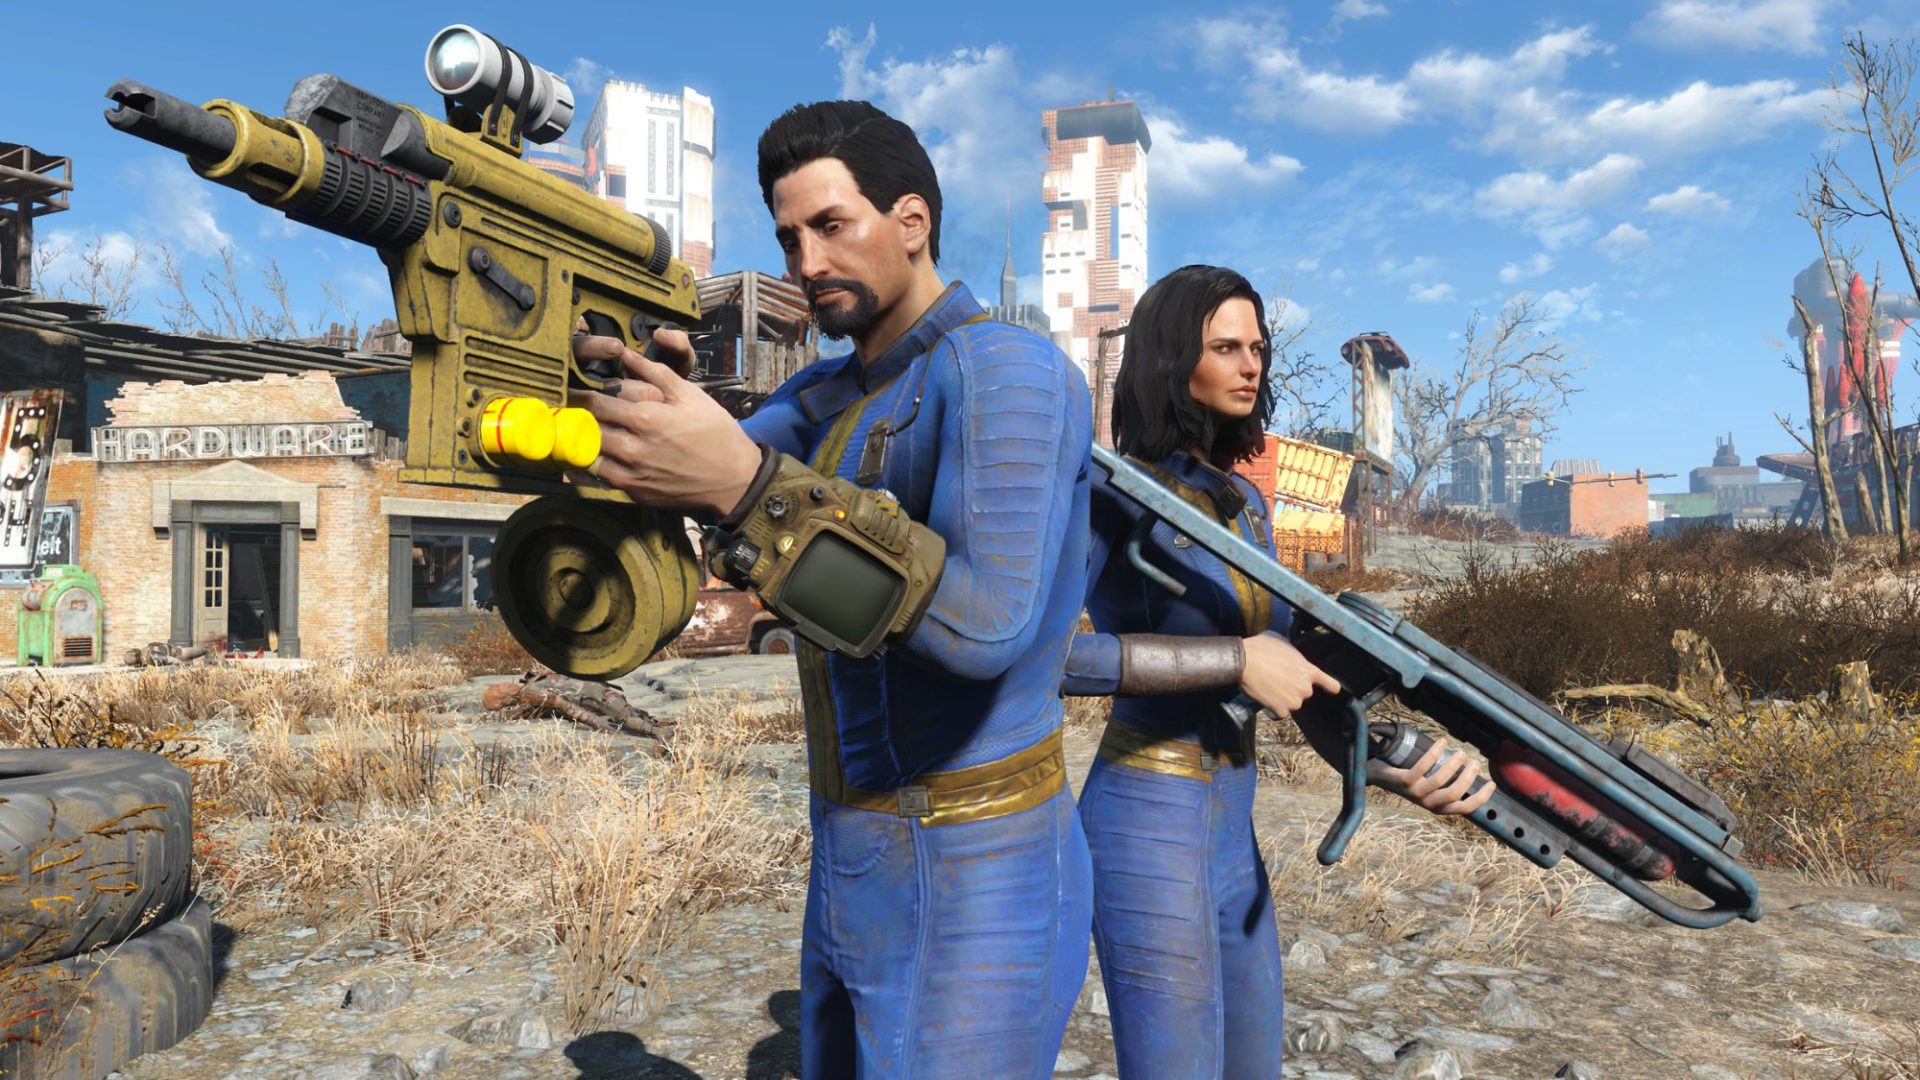 Fallout 4 Current-Gen Update Available Today with Performance and Quality Mode